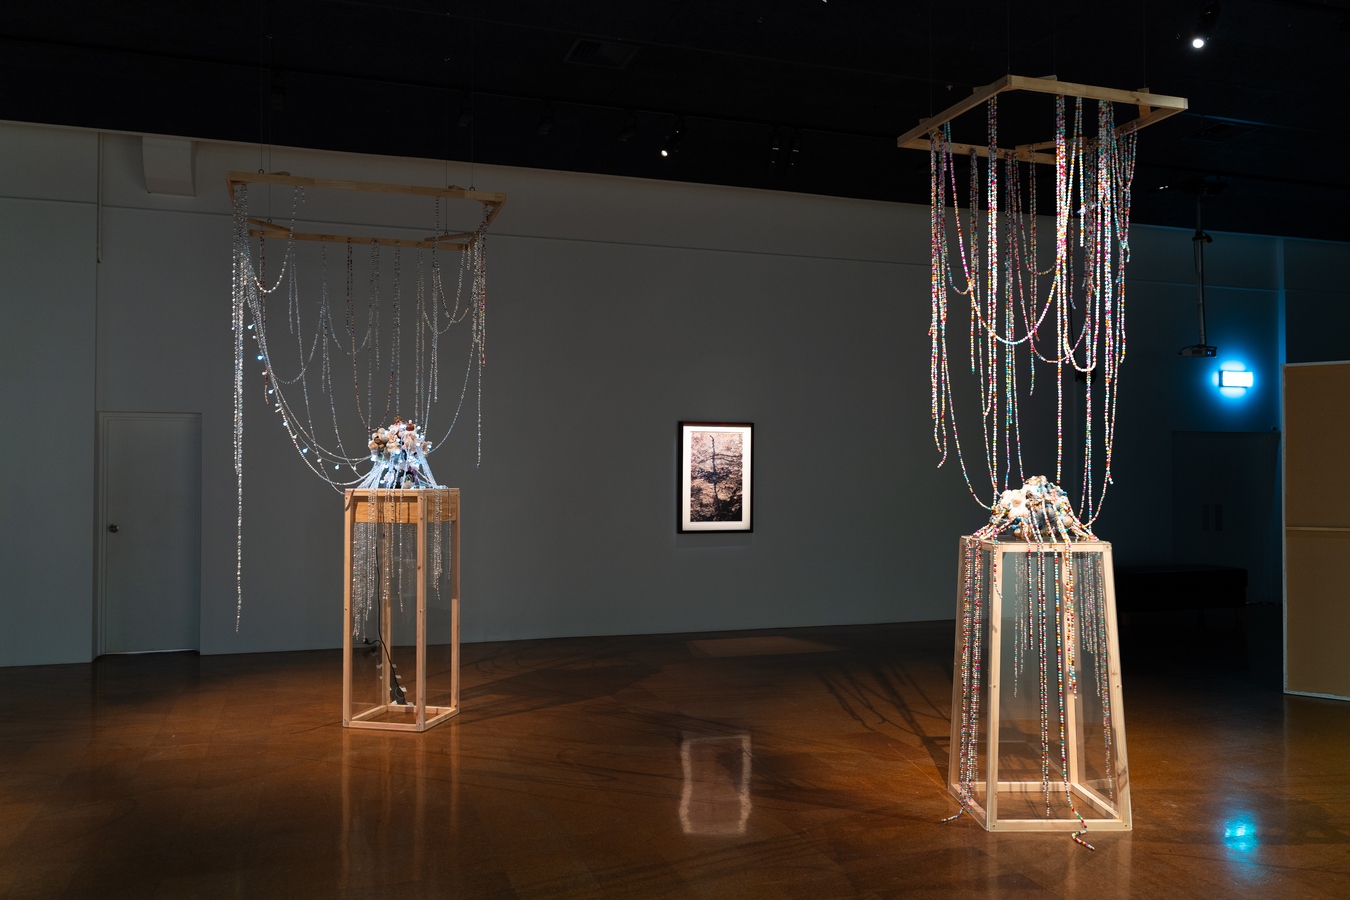 Image: Like water by water (installation view), 2023. Photo by Rosa Nevison.